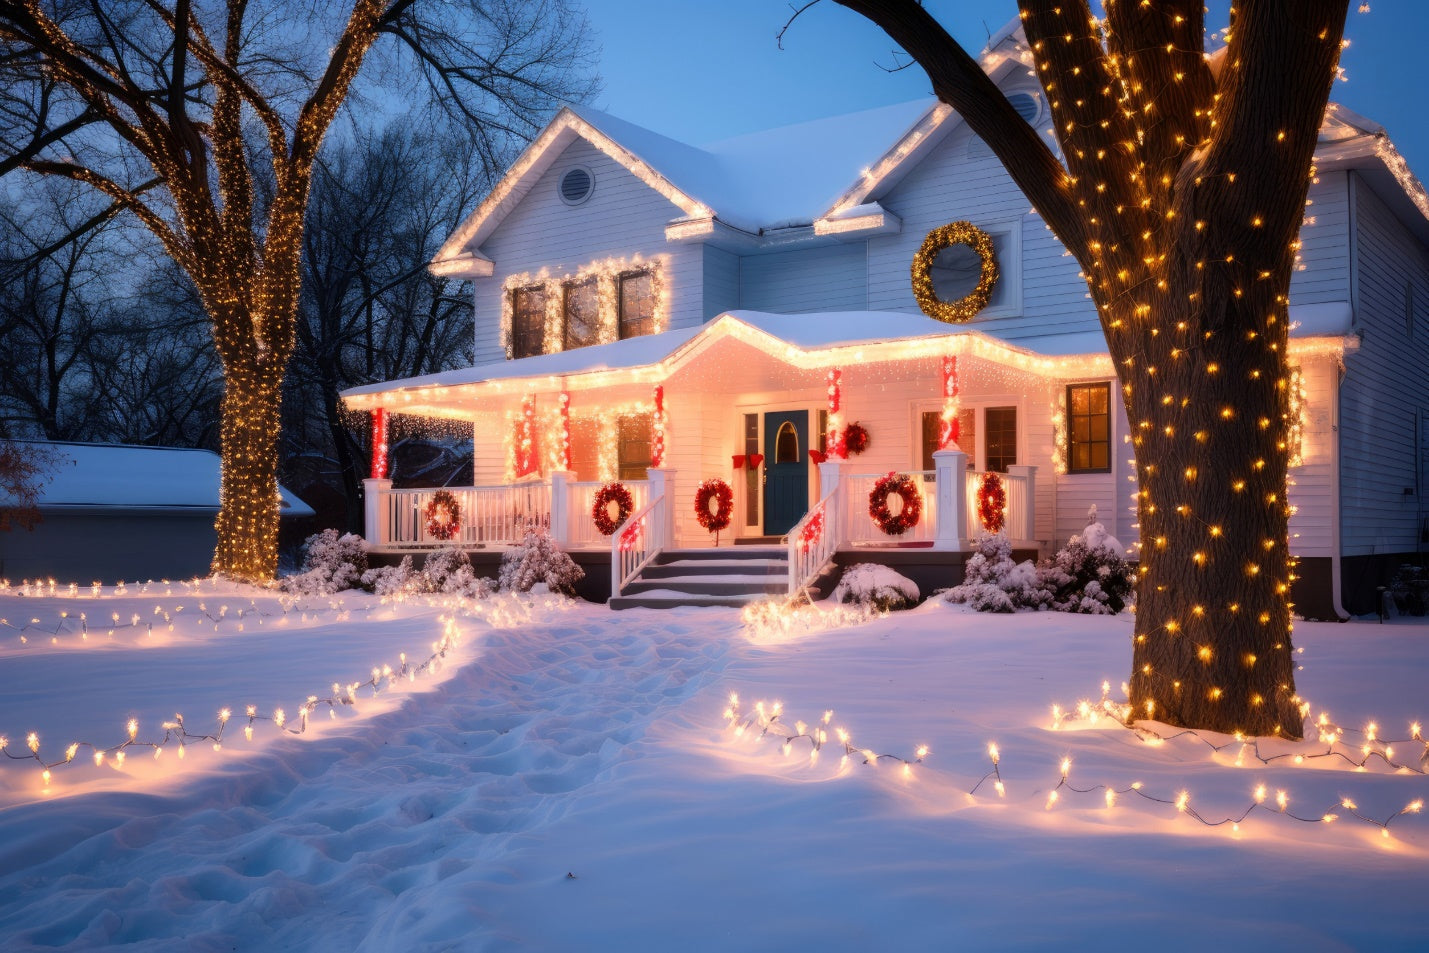 Using Smart Features & Automation for Your Holiday Lighting - MosquitoNix®